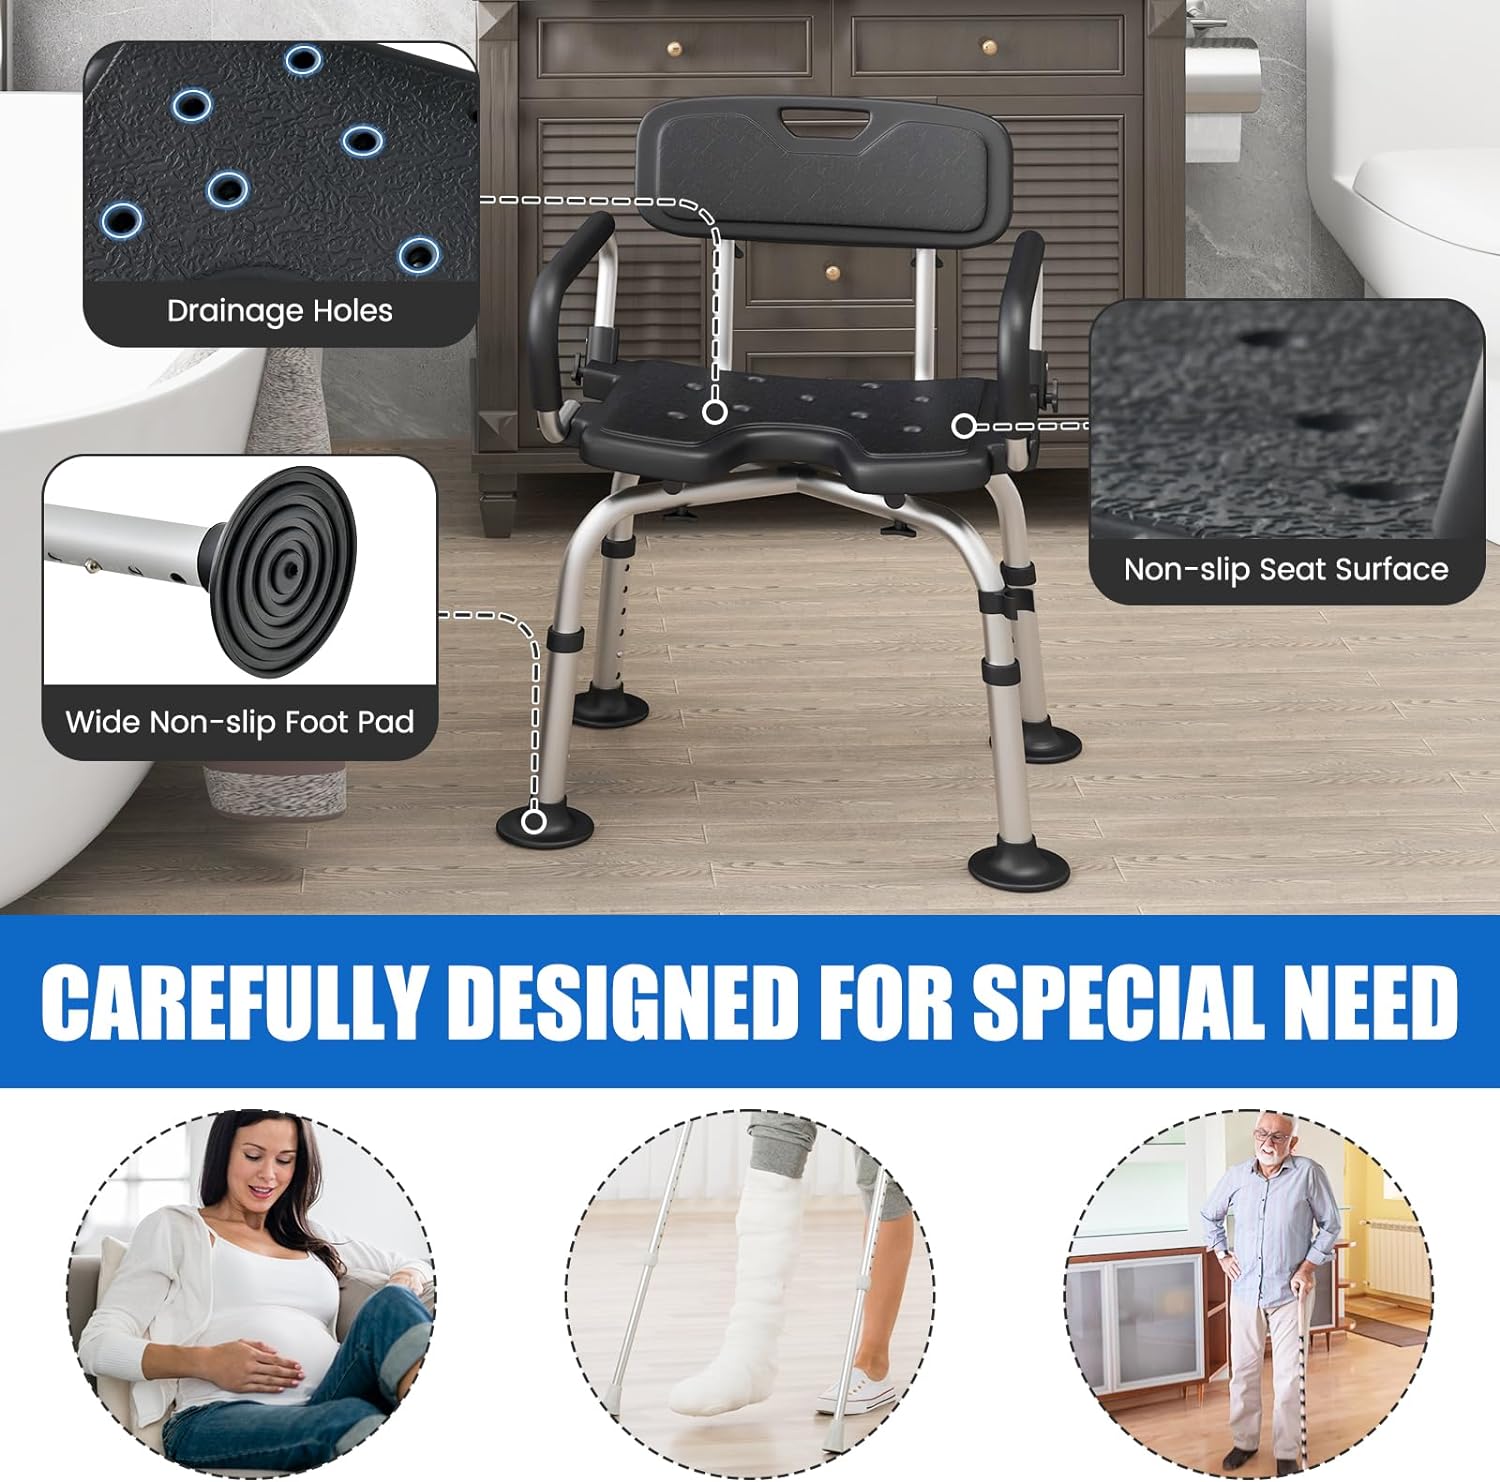 Costway Black Shower Chair U-Shaped Cutout with Back & Lifting Armrest NDIS and Aged Care